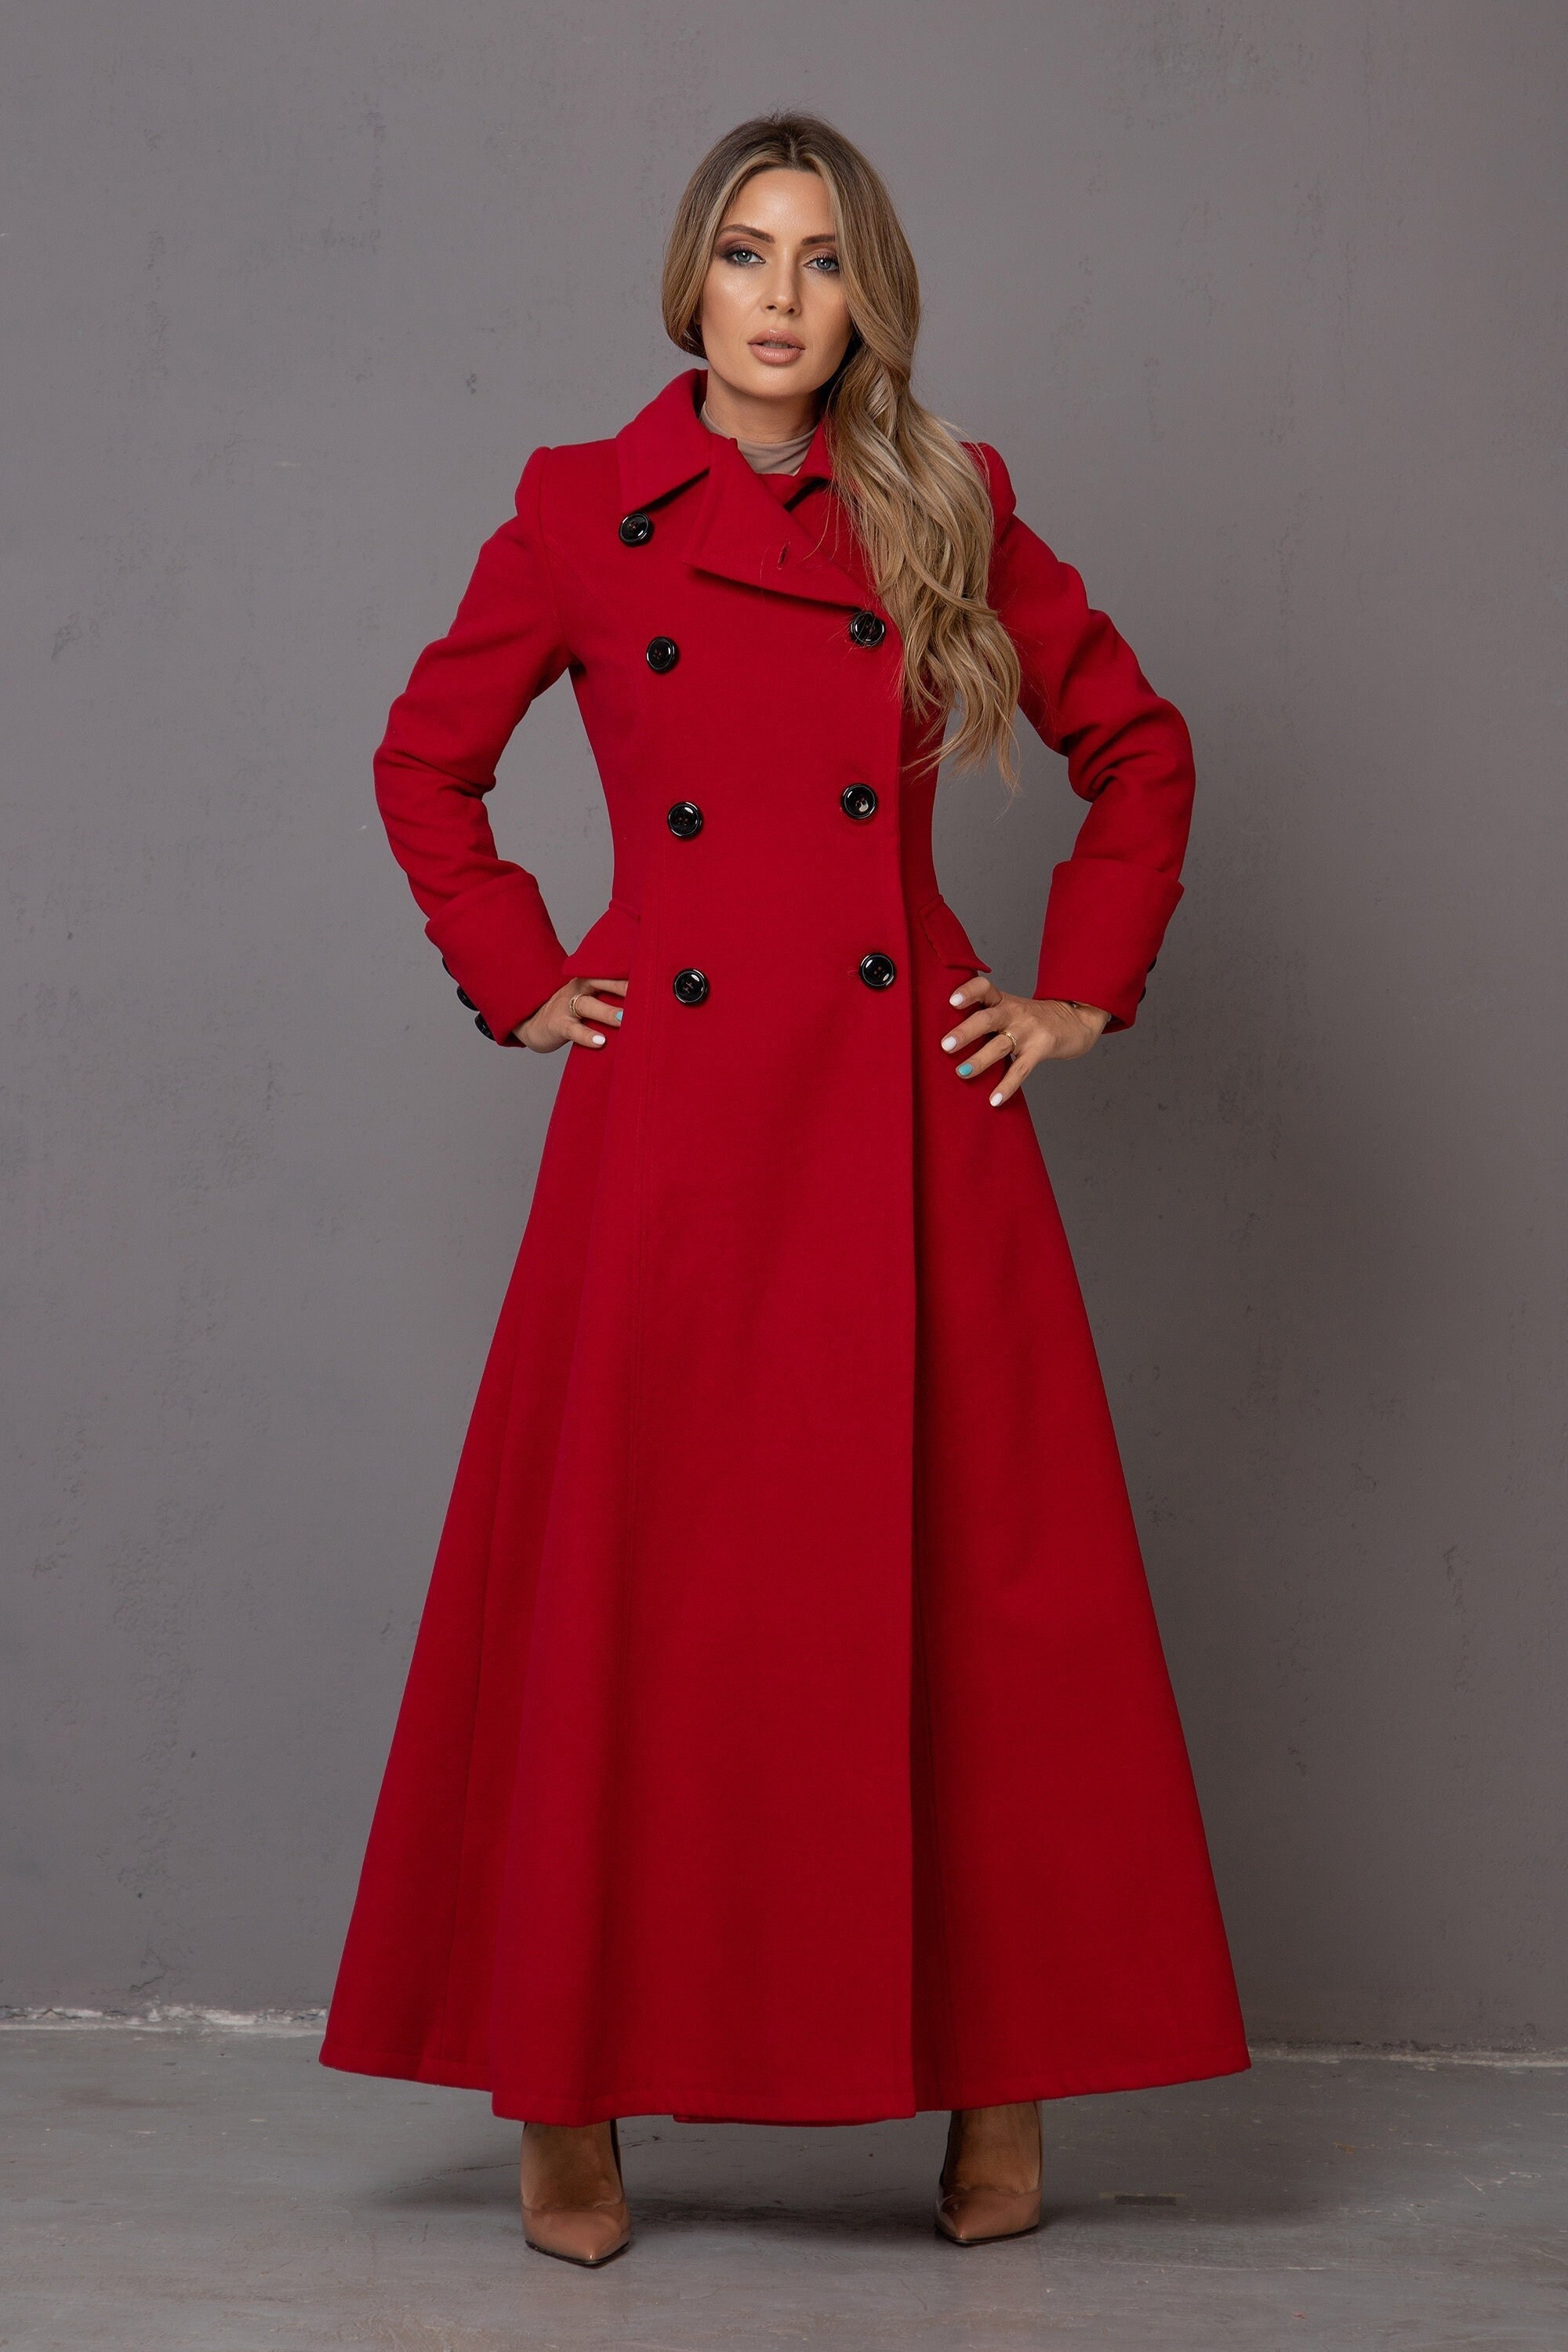 Womens Wool Coat Mid Length - Double Breasted Red Wool Coat Womens by FJackets